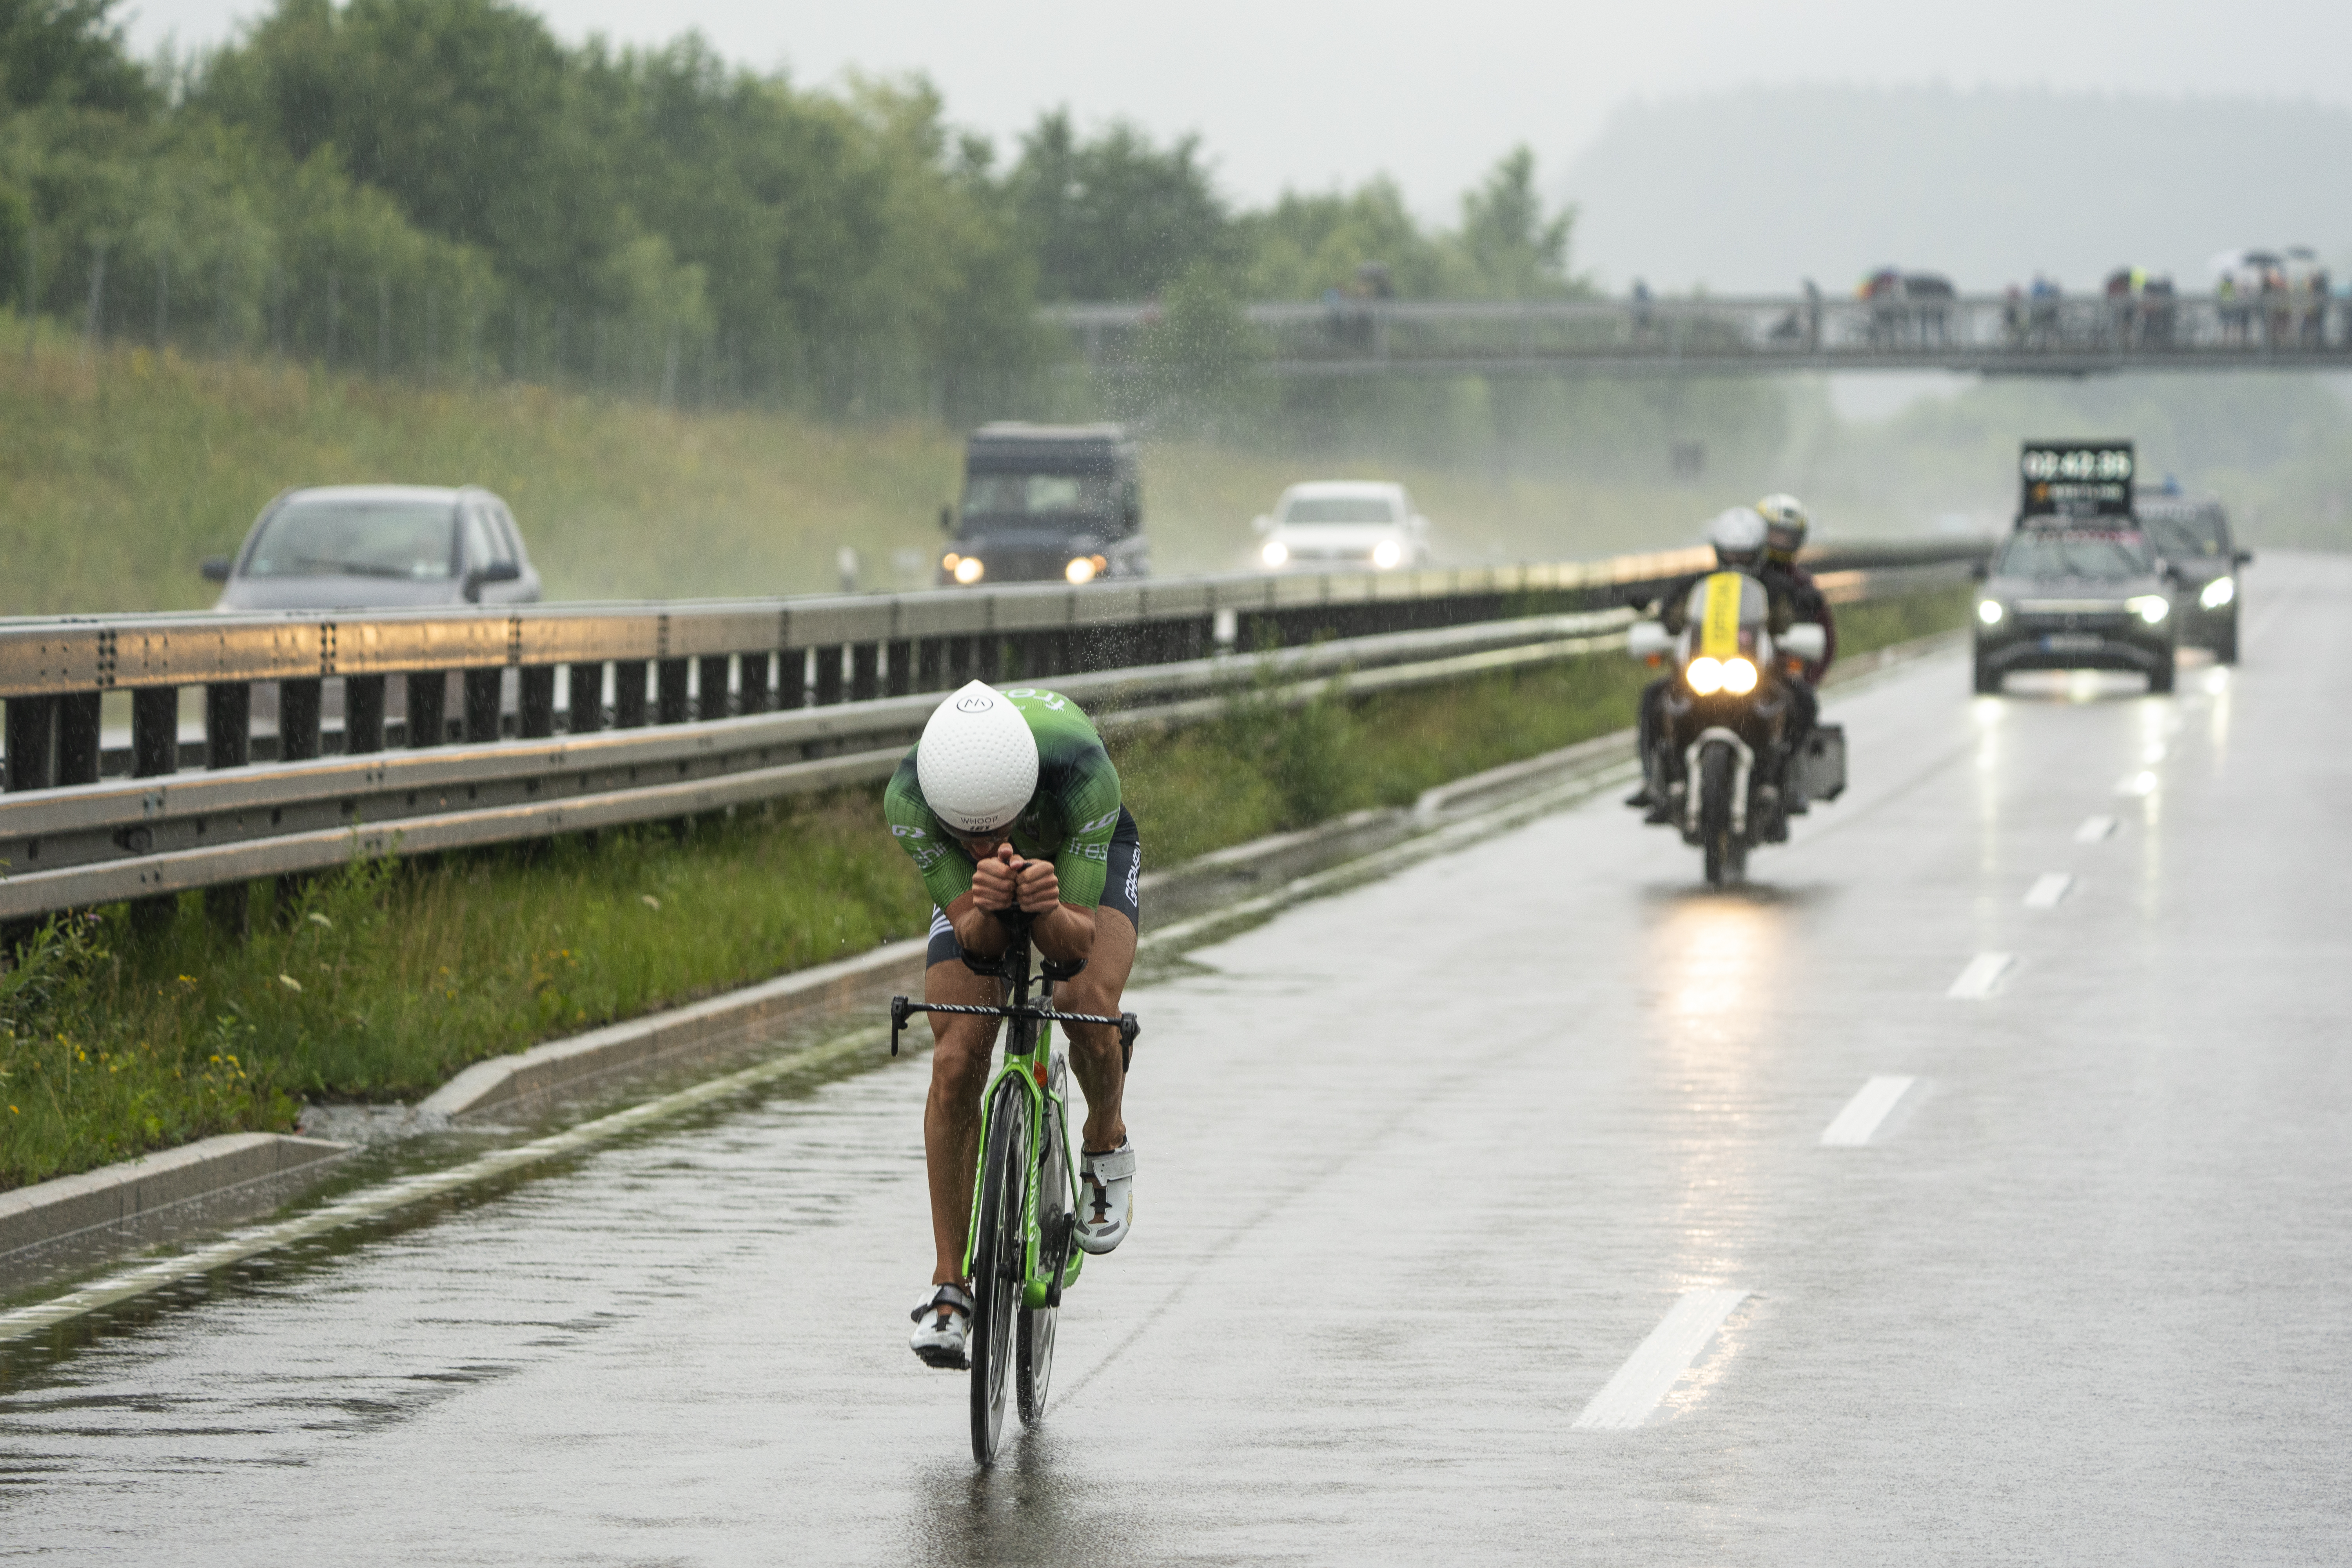 The heavens open on our racers, but an ever-aero Sanders hunkers down for the long-haul. 